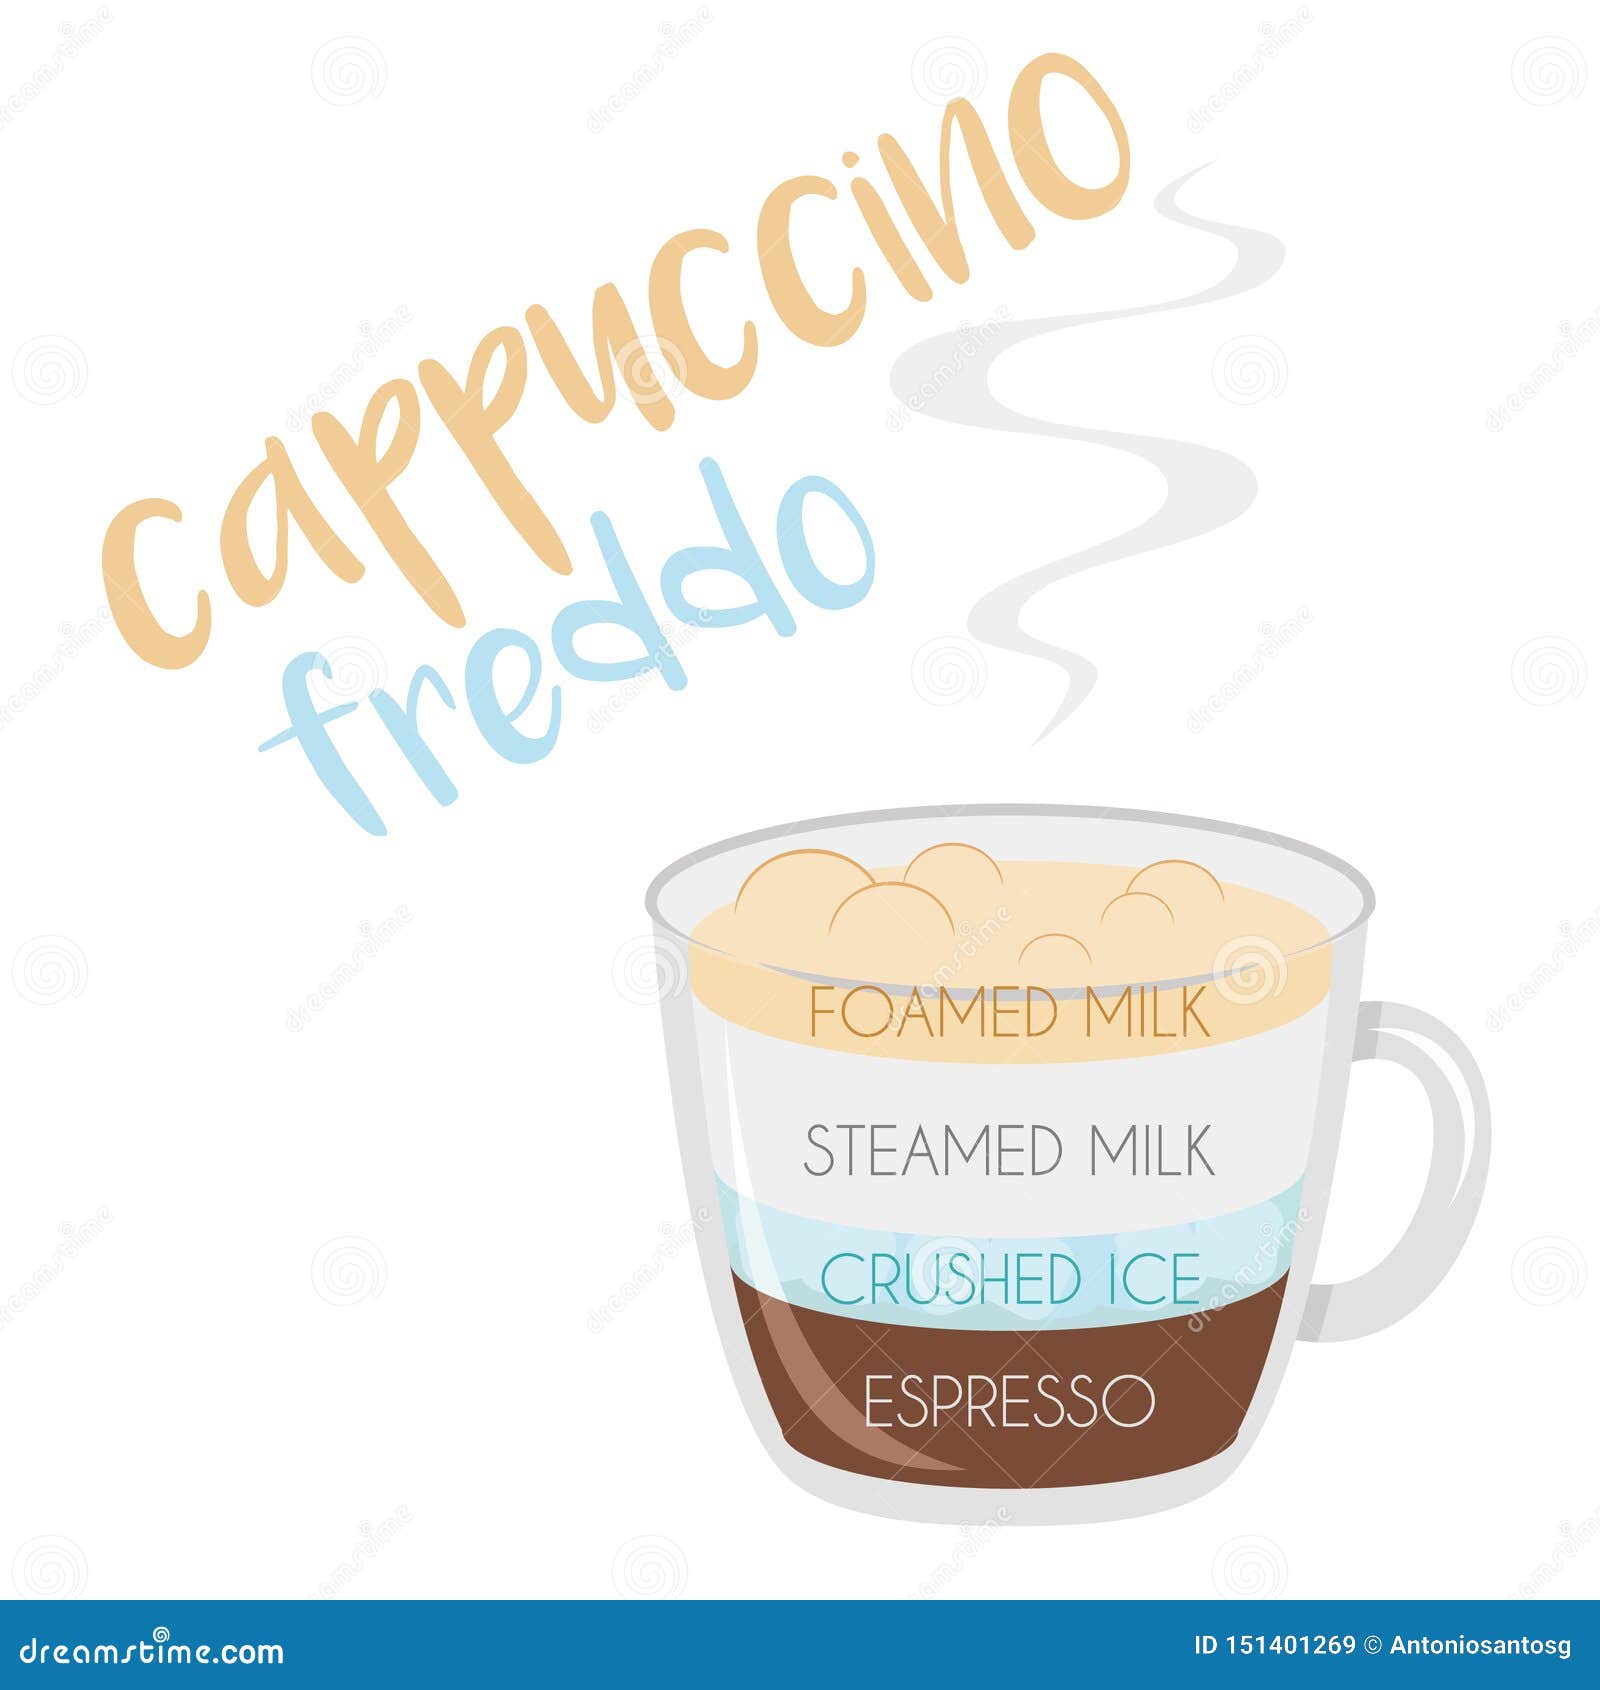   of a cappuccino freddo coffee cup icon with its preparation and proportions